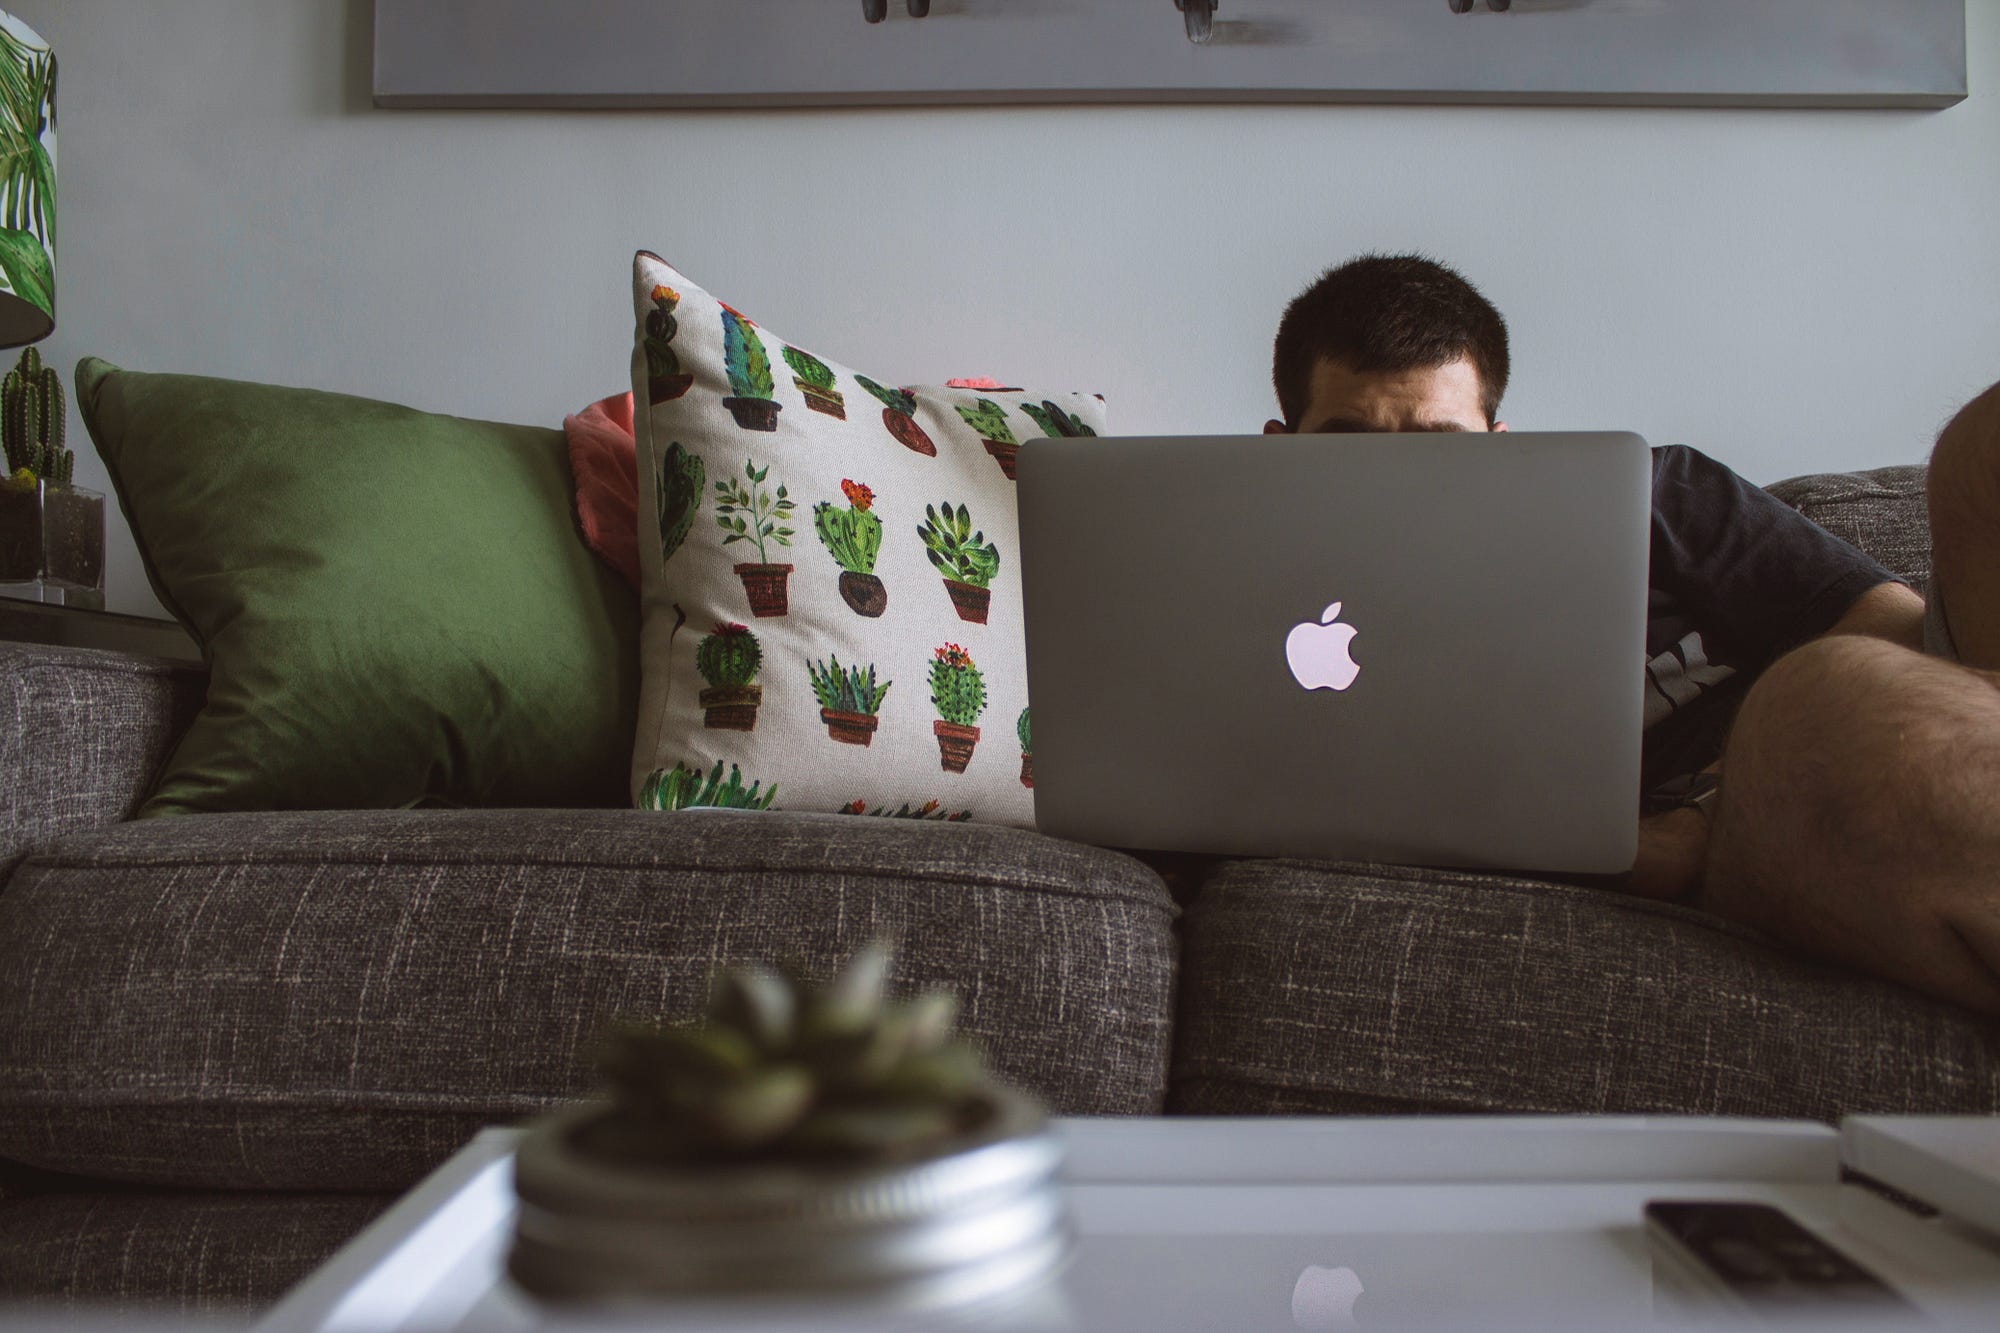 Why I Love Working from Home. And why some seem to hate it | by Toby  Hazlewood | The Startup | Medium